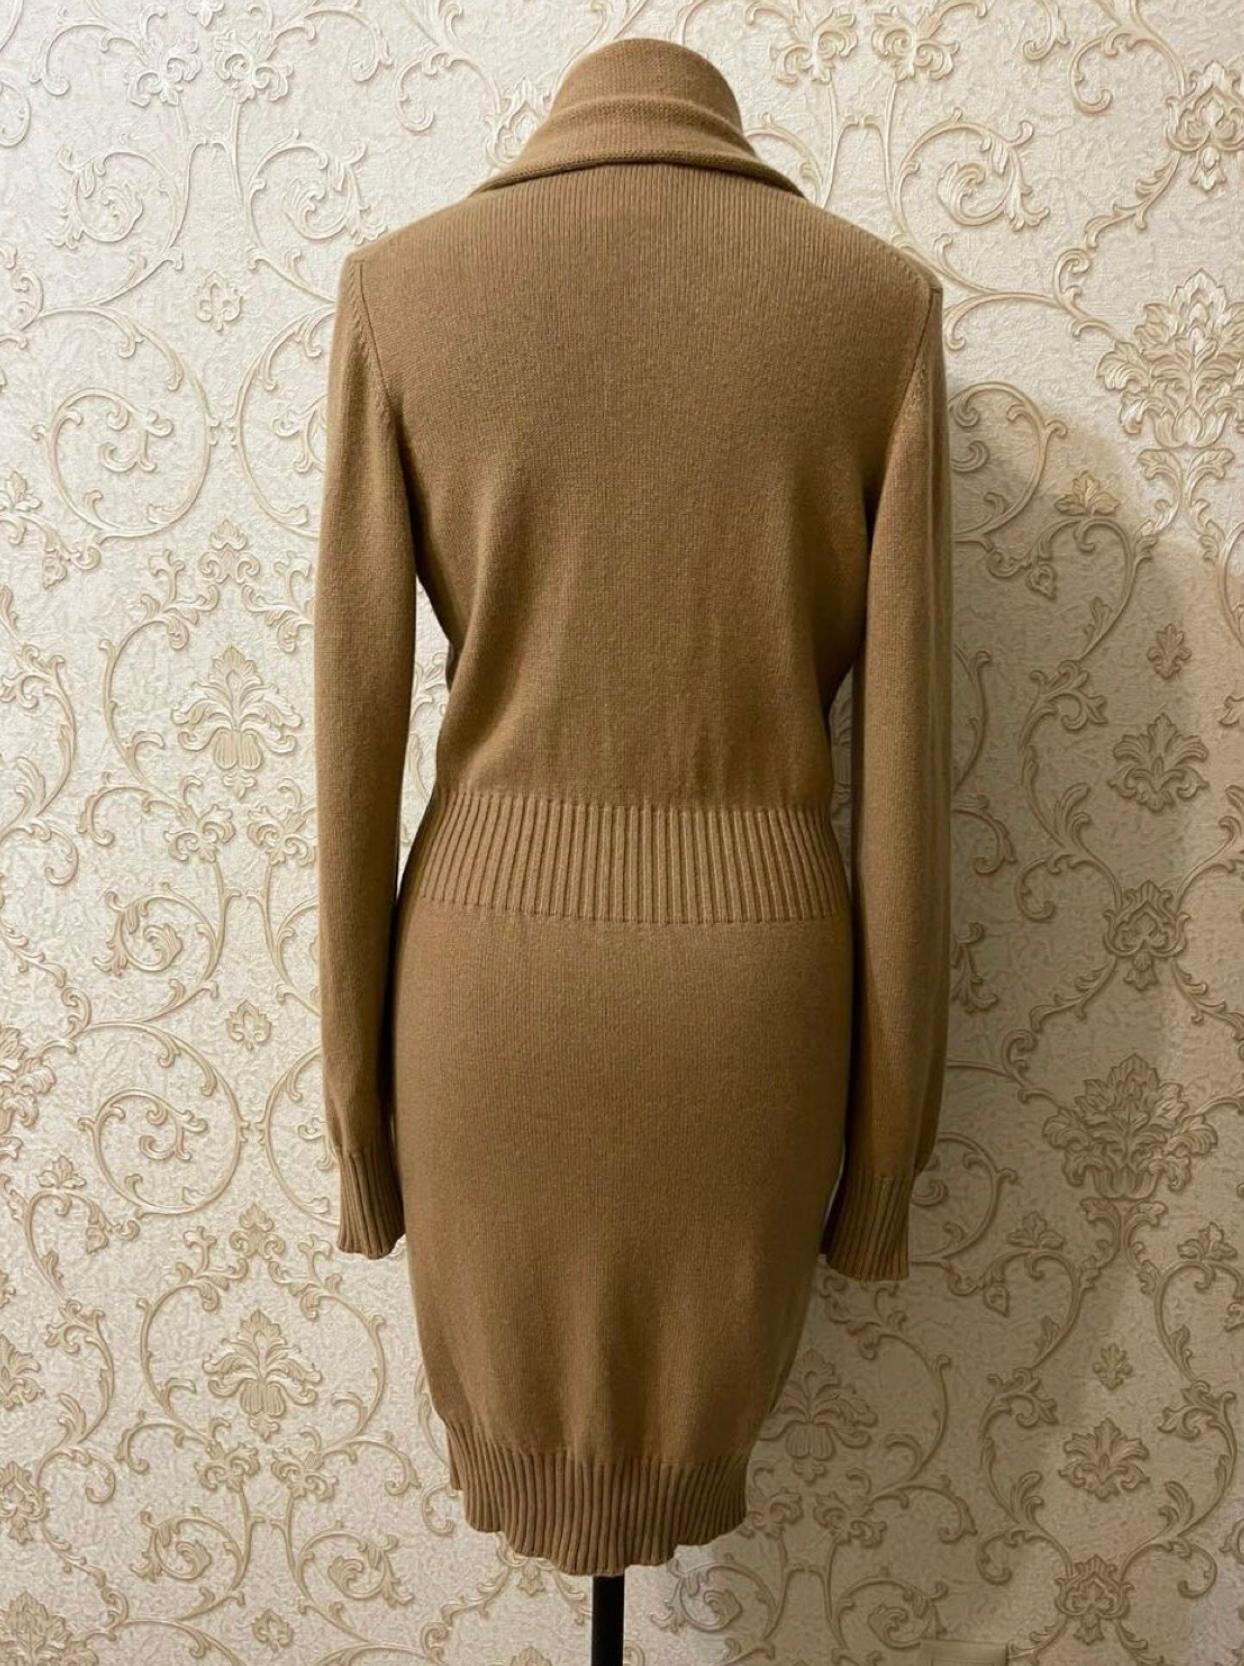 Chanel Claudia Schiffer Style Camel Cashmere Cardi Coat For Sale 3